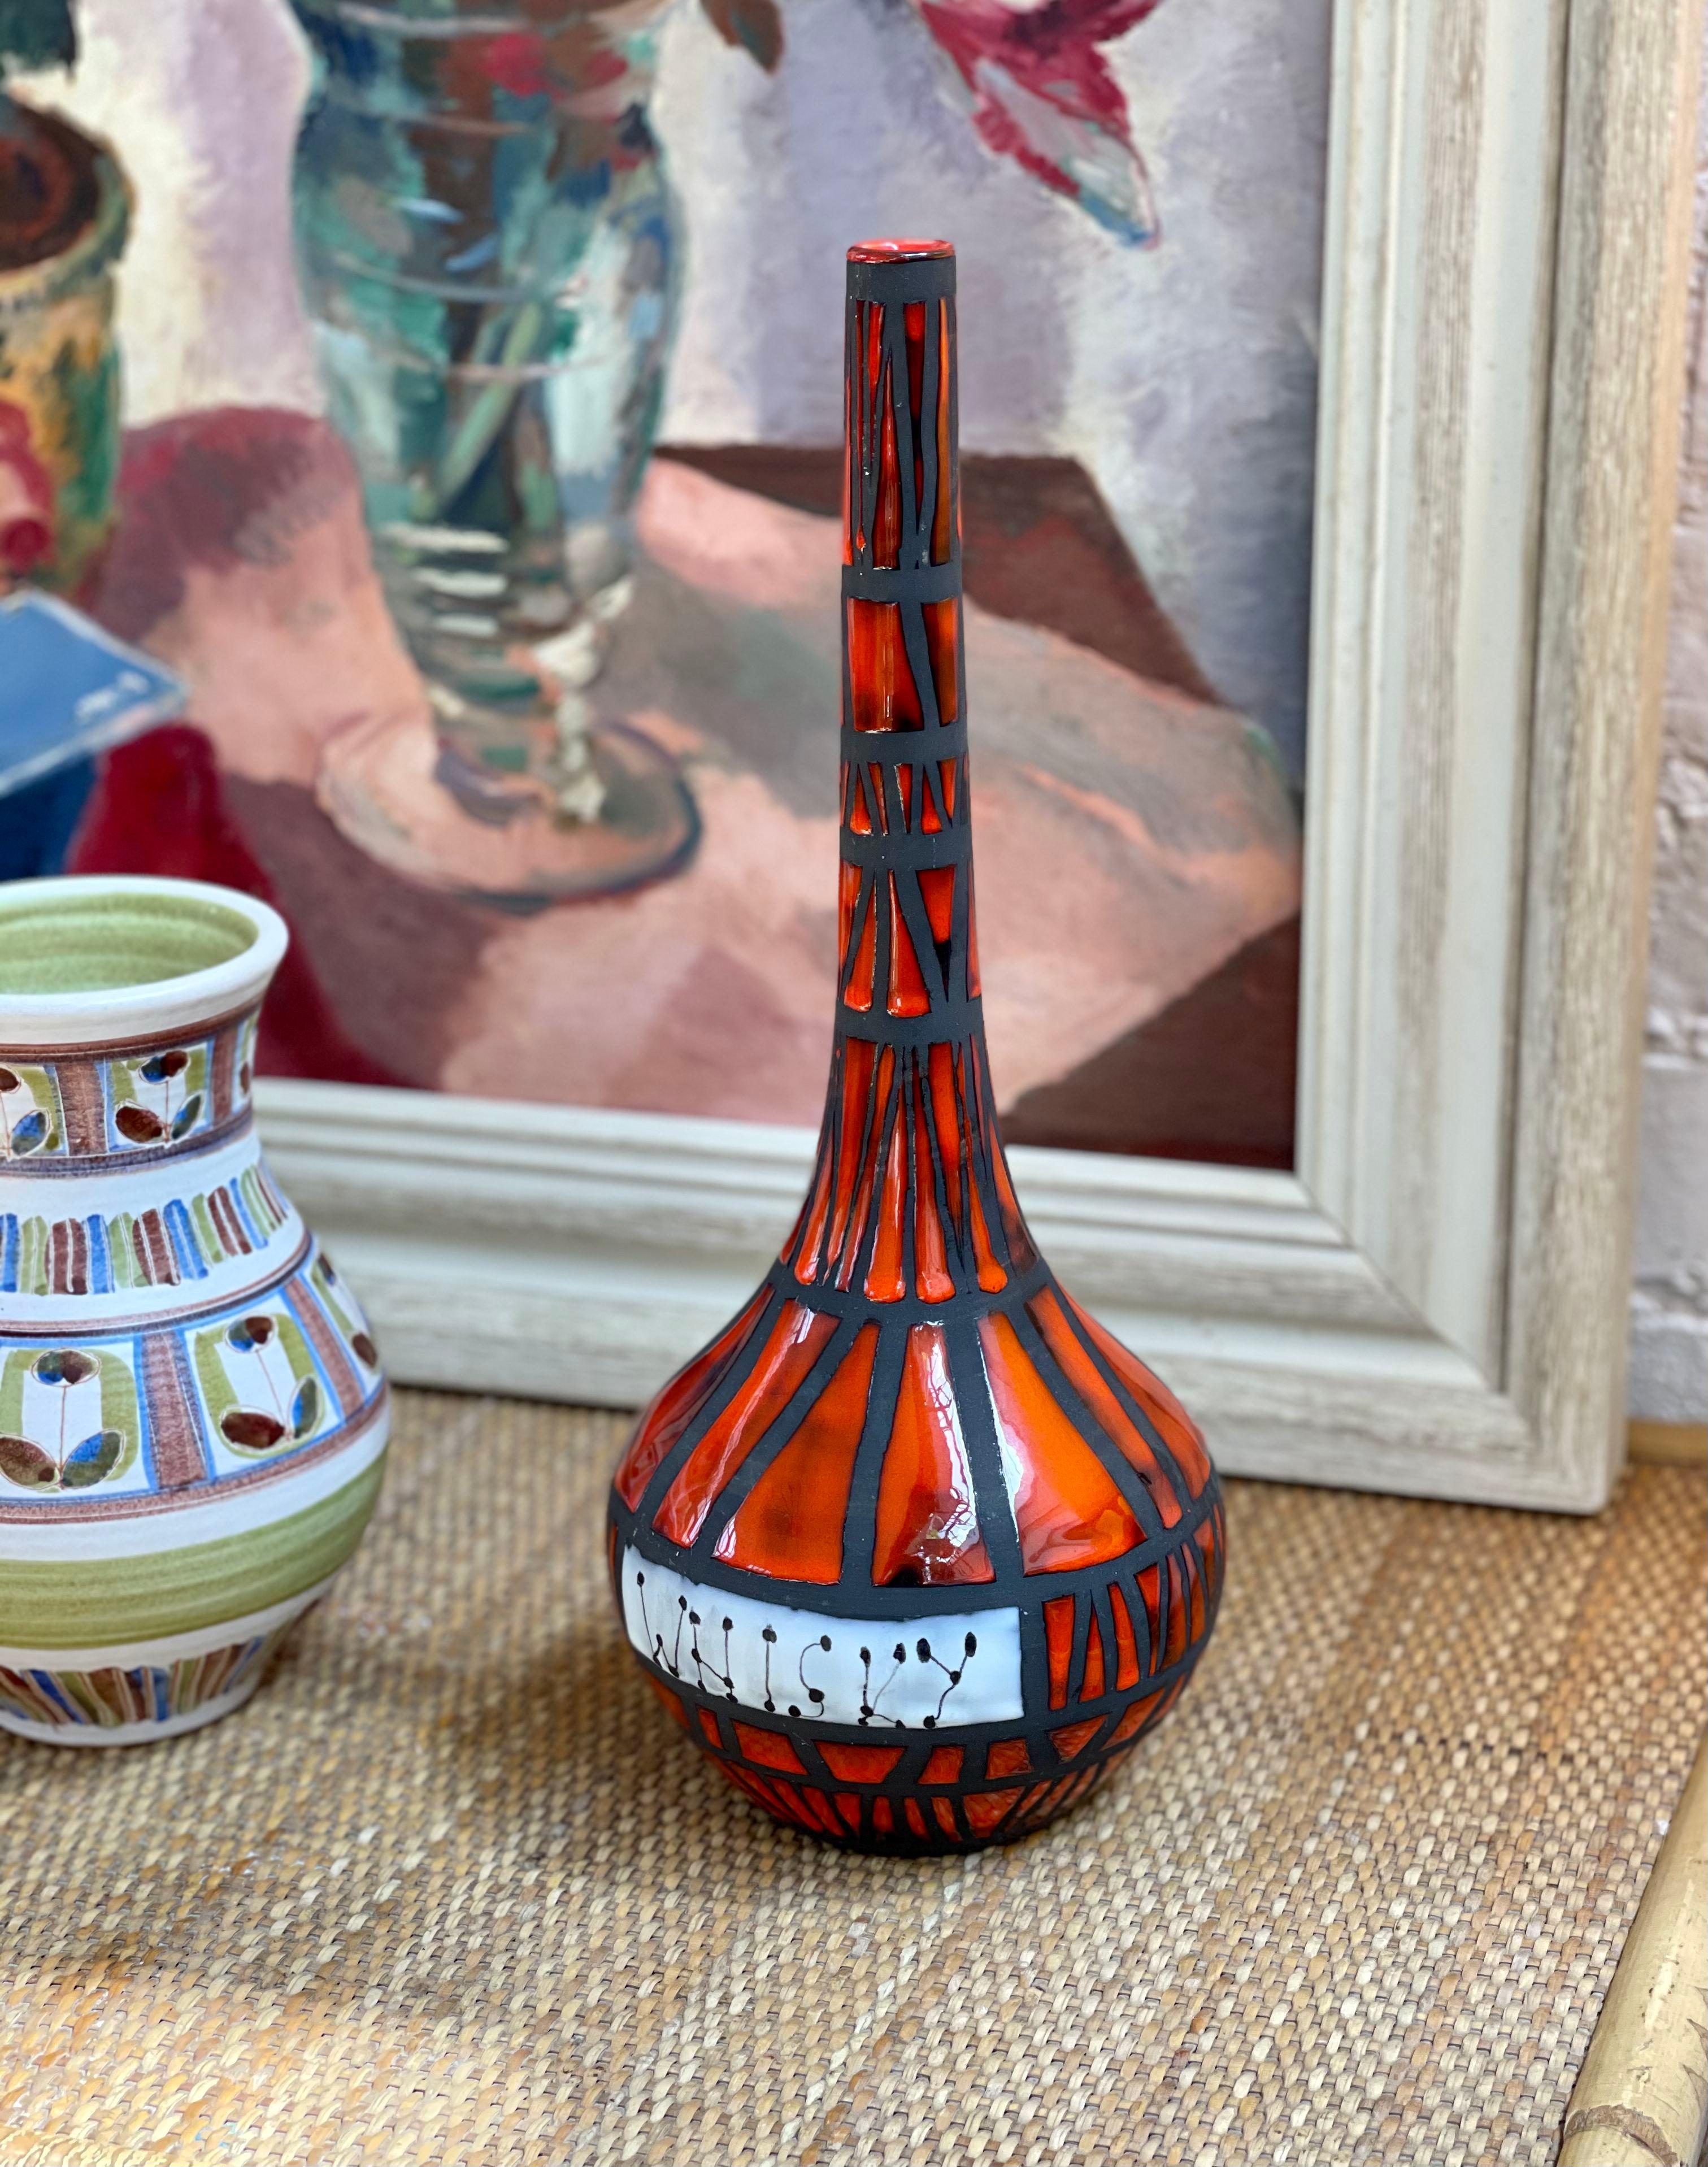 Vintage French ceramic bottle-shaped vase by Roger Capron (circa 1960s). Although probably not practical as a whisky decanter, it rather serves as a delightful work of art instead. With its enamelled red surface, strong vertical lines all framing a